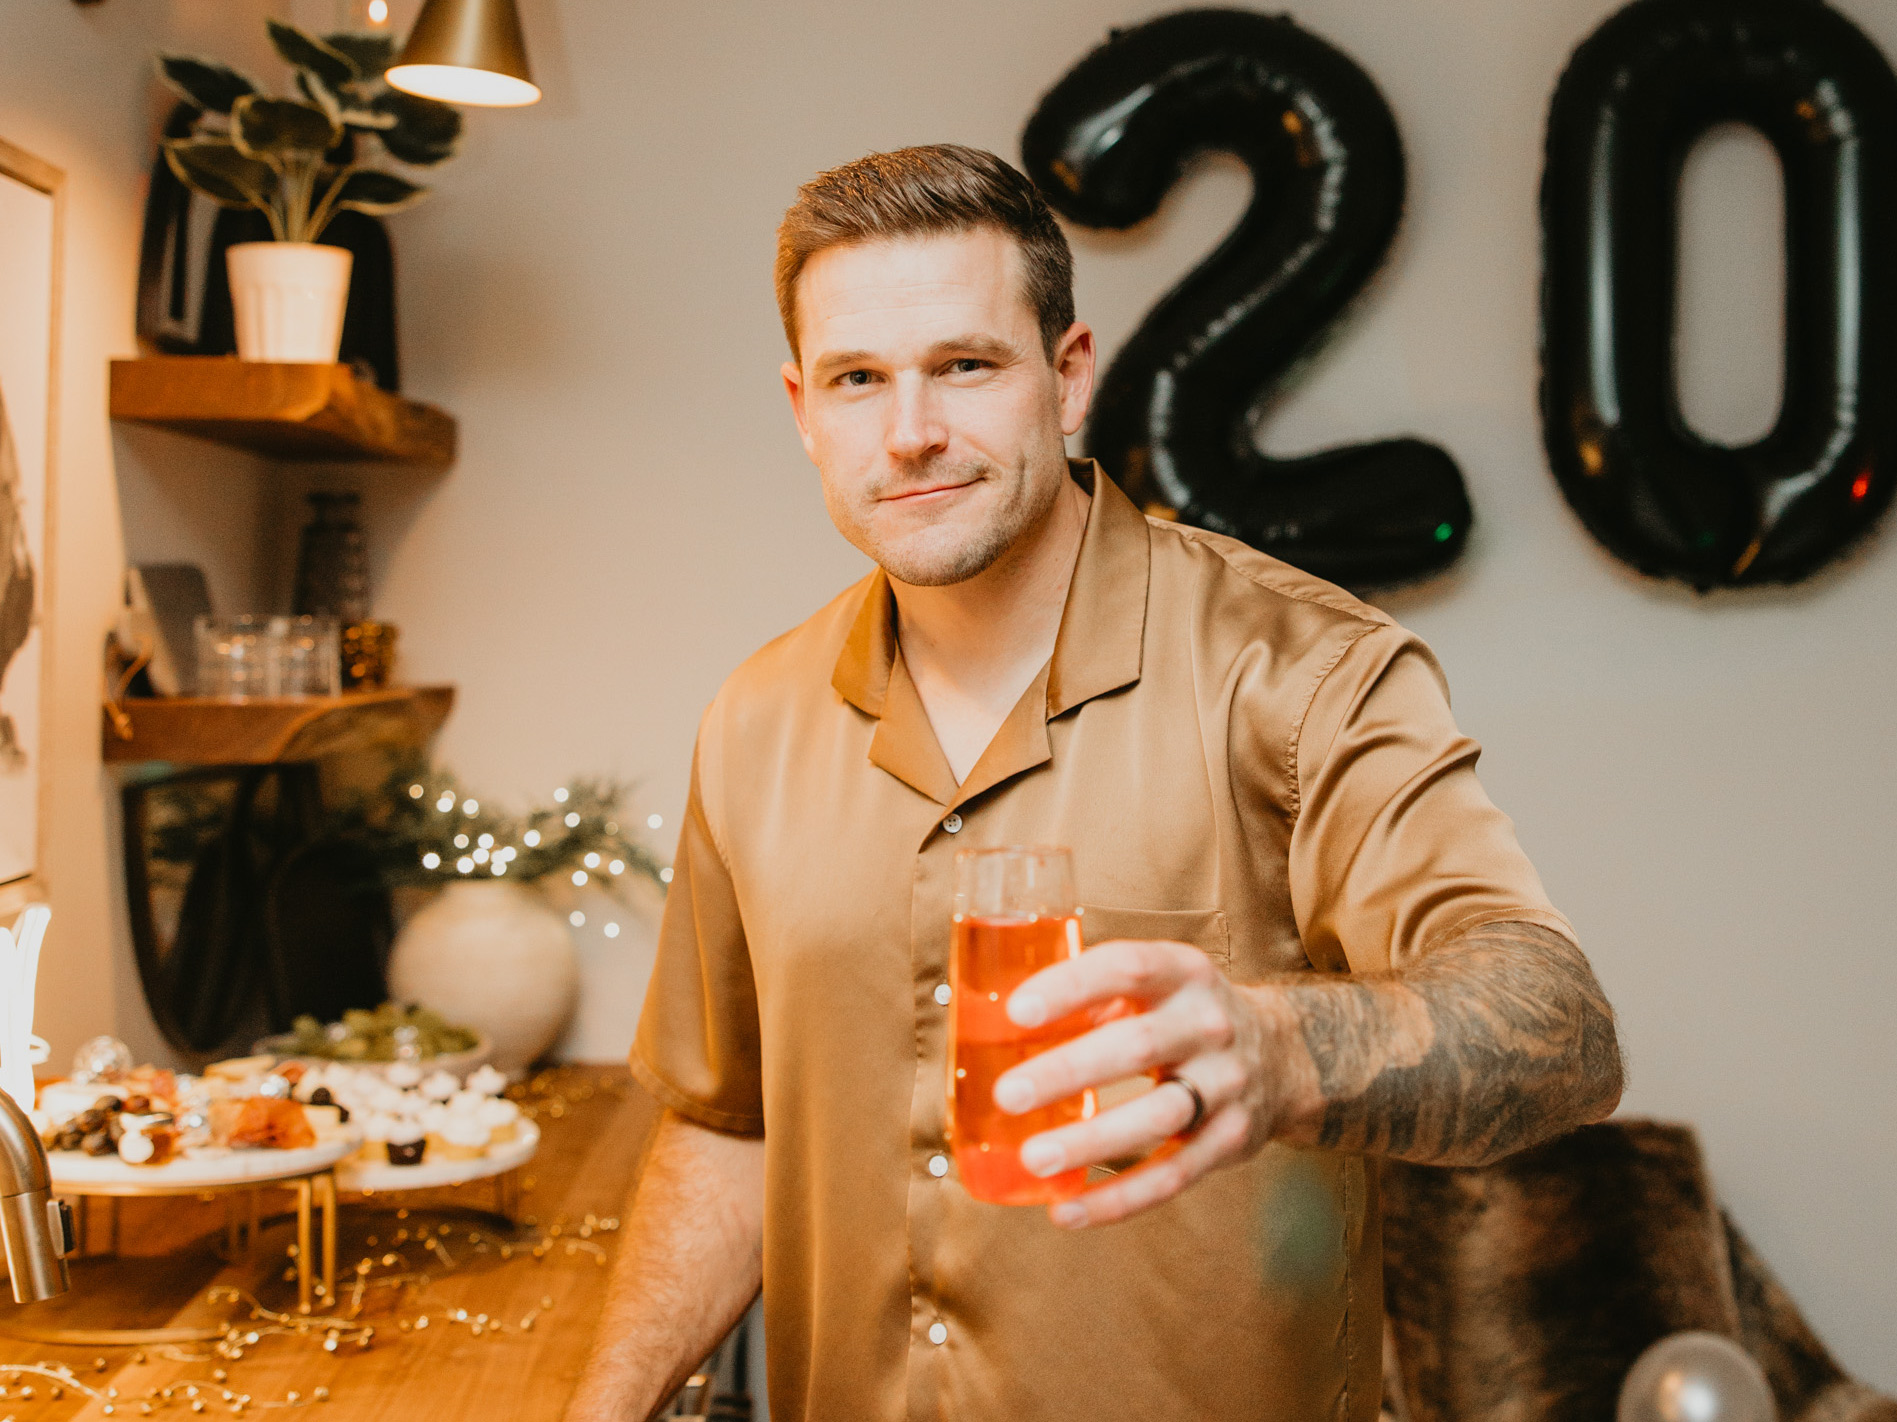 Ring in the New Year with the Down Home Fab host’s fun kid mocktail and his cocktail twist for the adults.